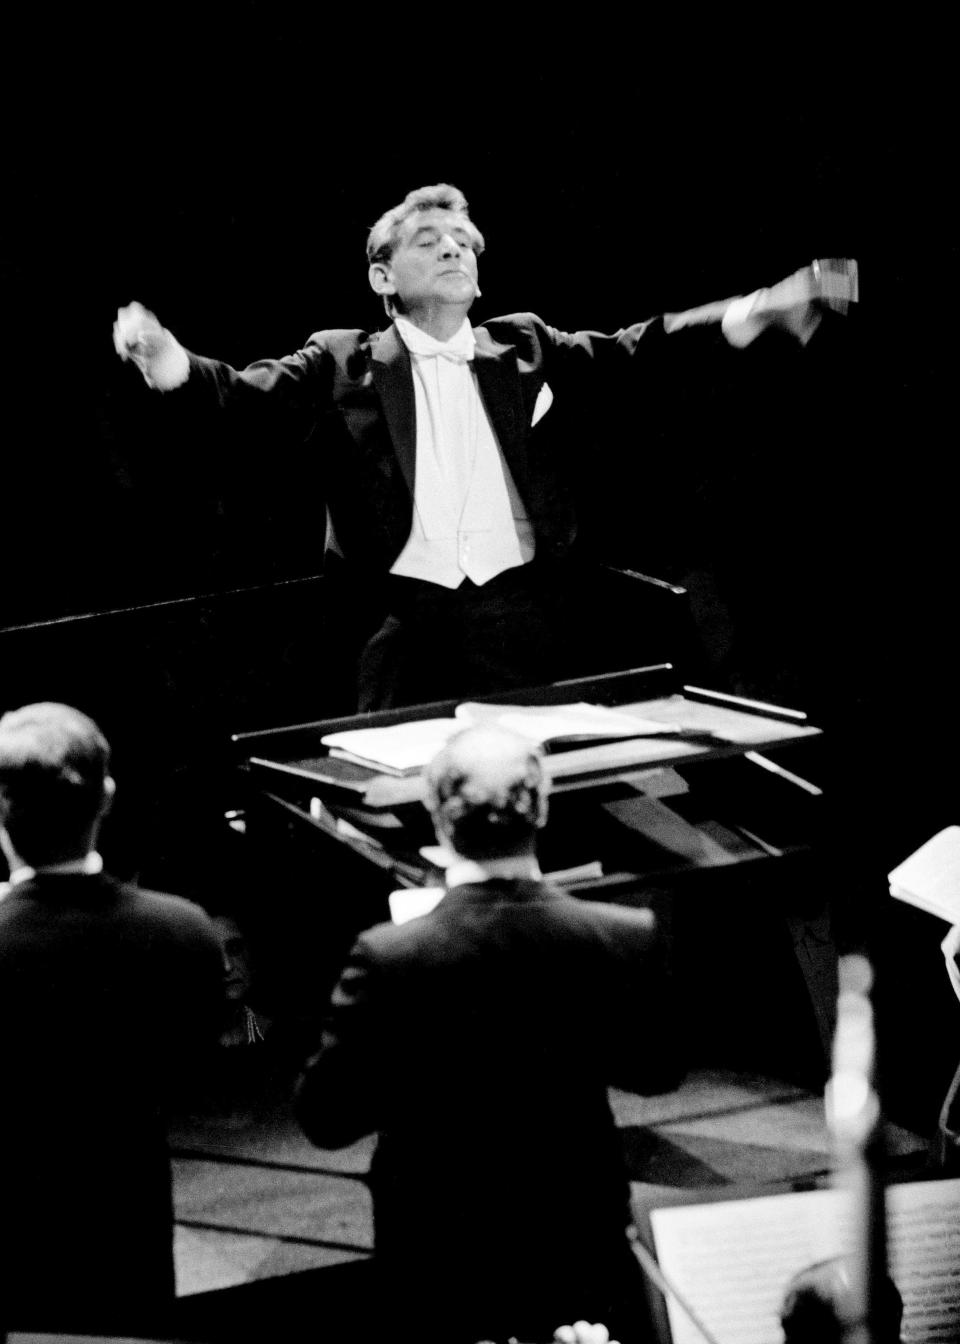 Leonard Bernstein conducts the New York Philharmonic at the opening of Philharmonic Hall in Manhattan, Sept. 23, 1962. For his role as Leonard Bernstein in "Maestro," Bradley Cooper learned from top conductors and by stealth in concert halls or from the orchestra pit.